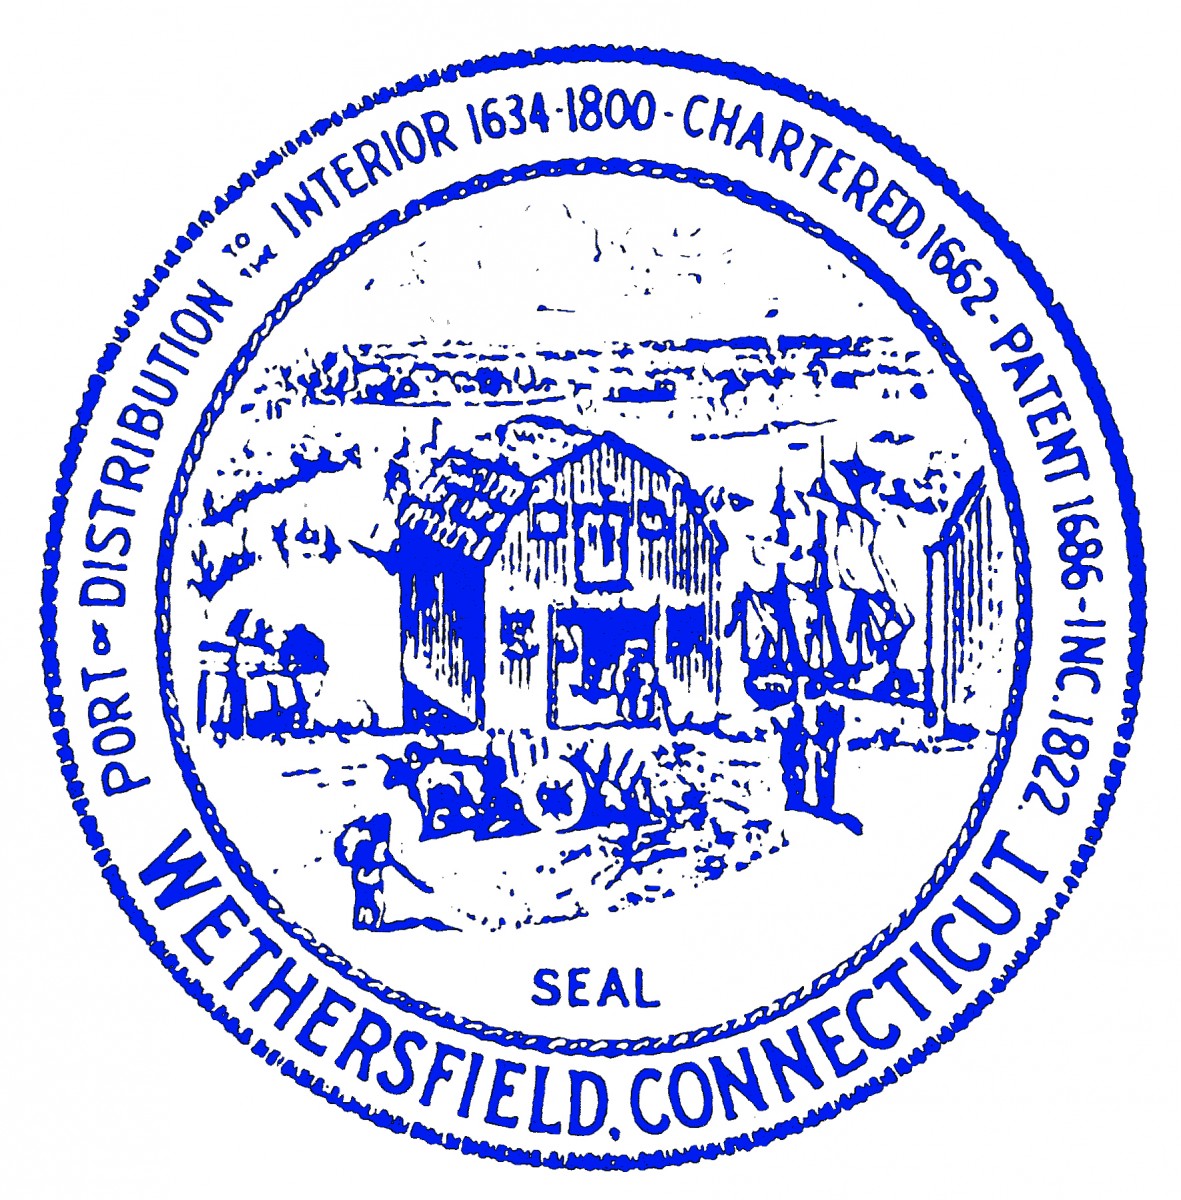 Mechanical Services in Wethersfield, CT